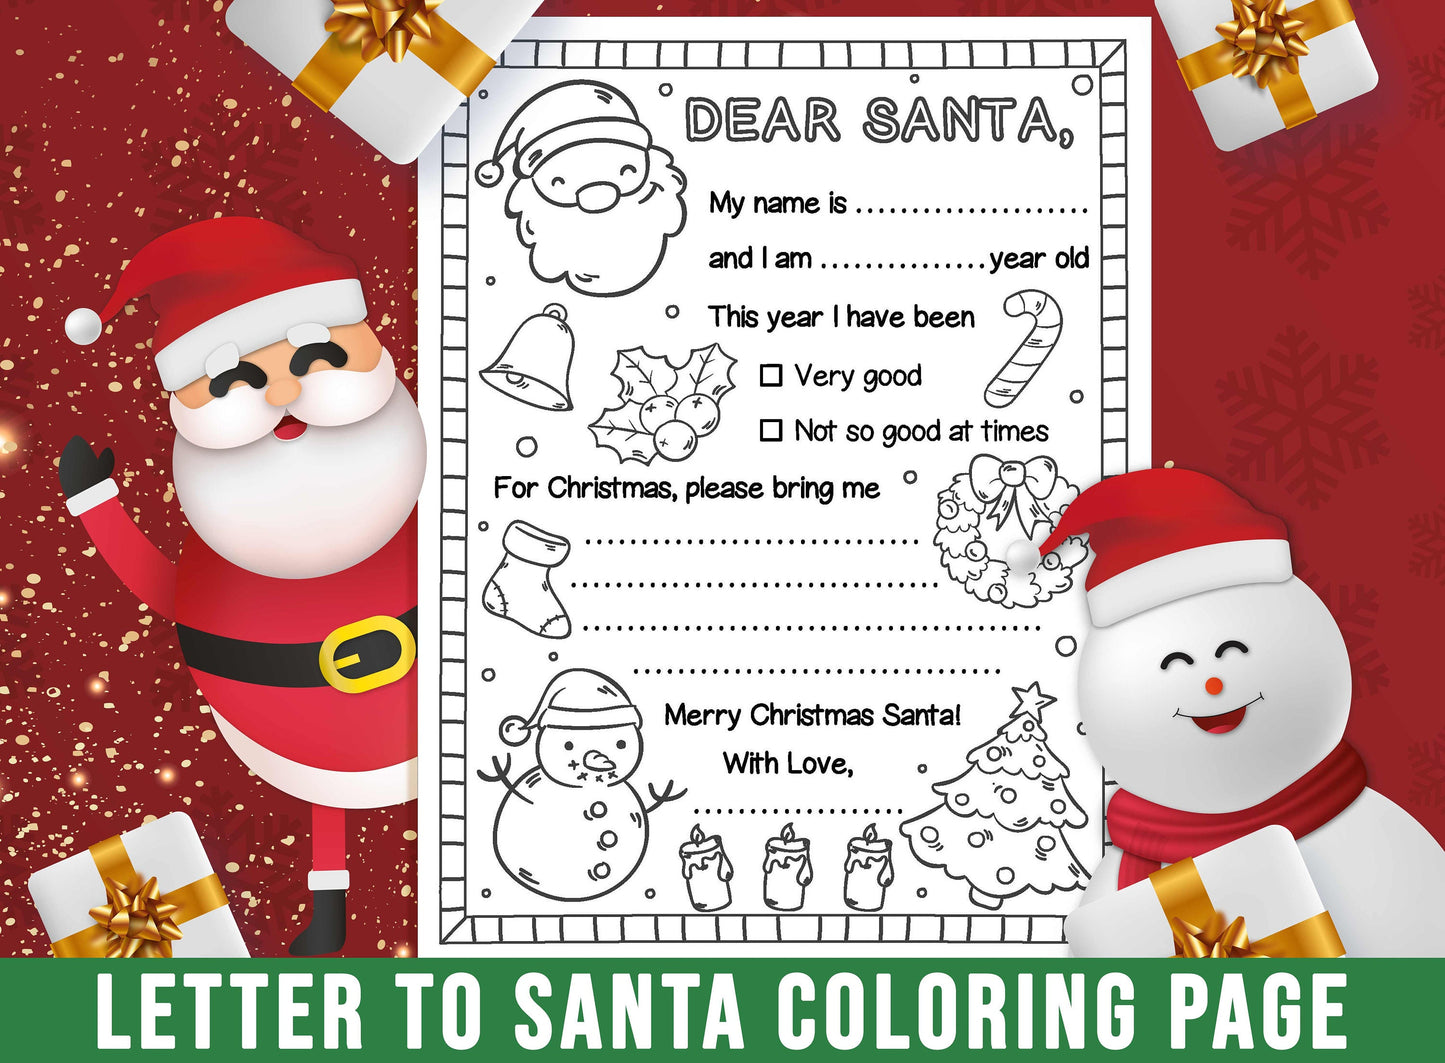 Letter to Santa Coloring Page, Printable Letter To Santa for Kids, Printable Dear Santa Letter, Christmas Wish List, Christmas Kids Activity